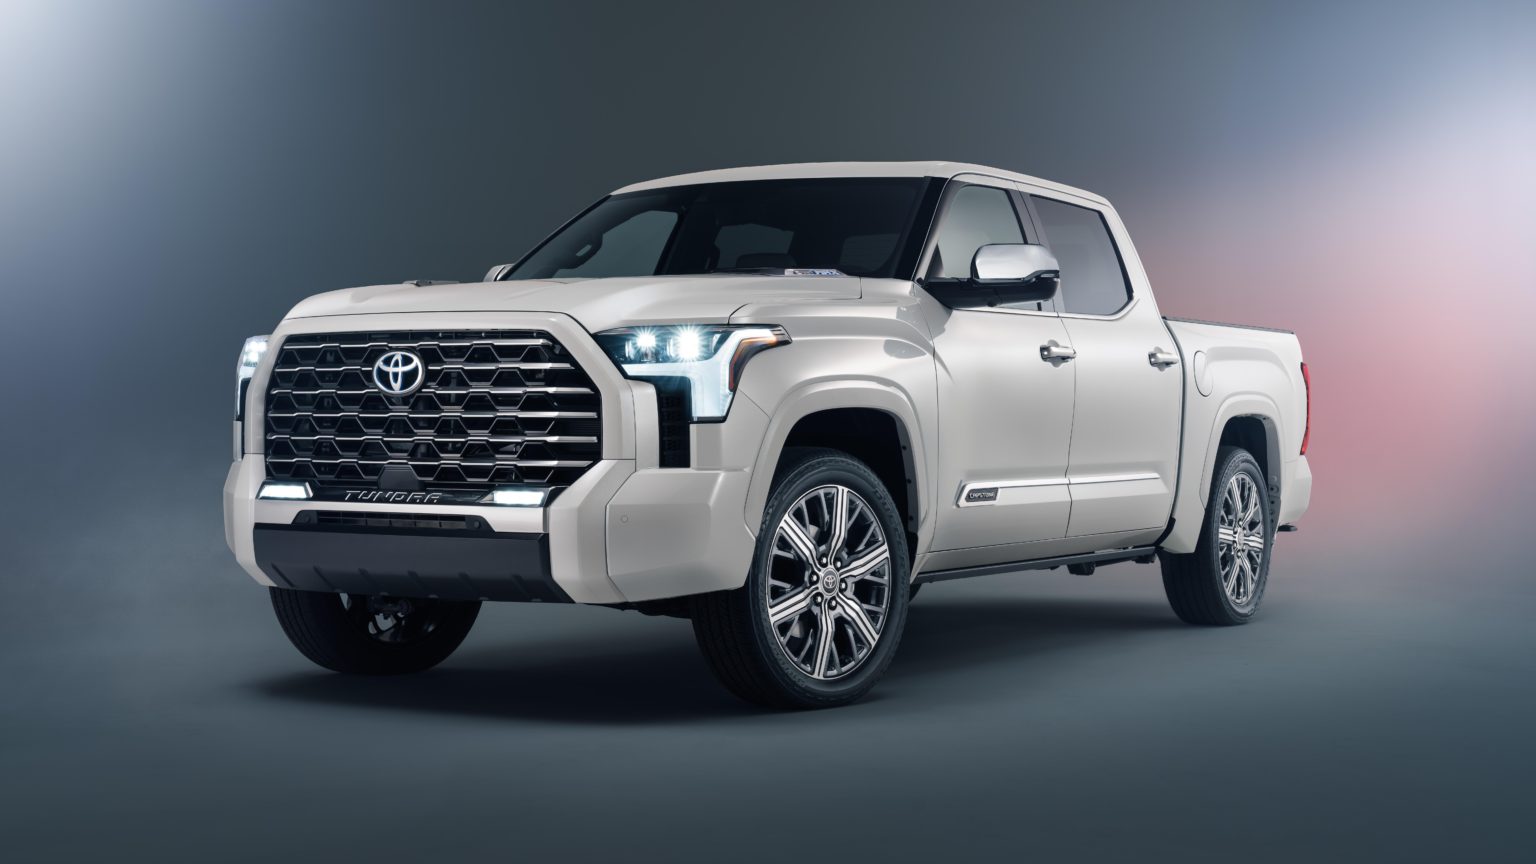 The Capstone is a luxurious new trim for the 2022 Tundra.